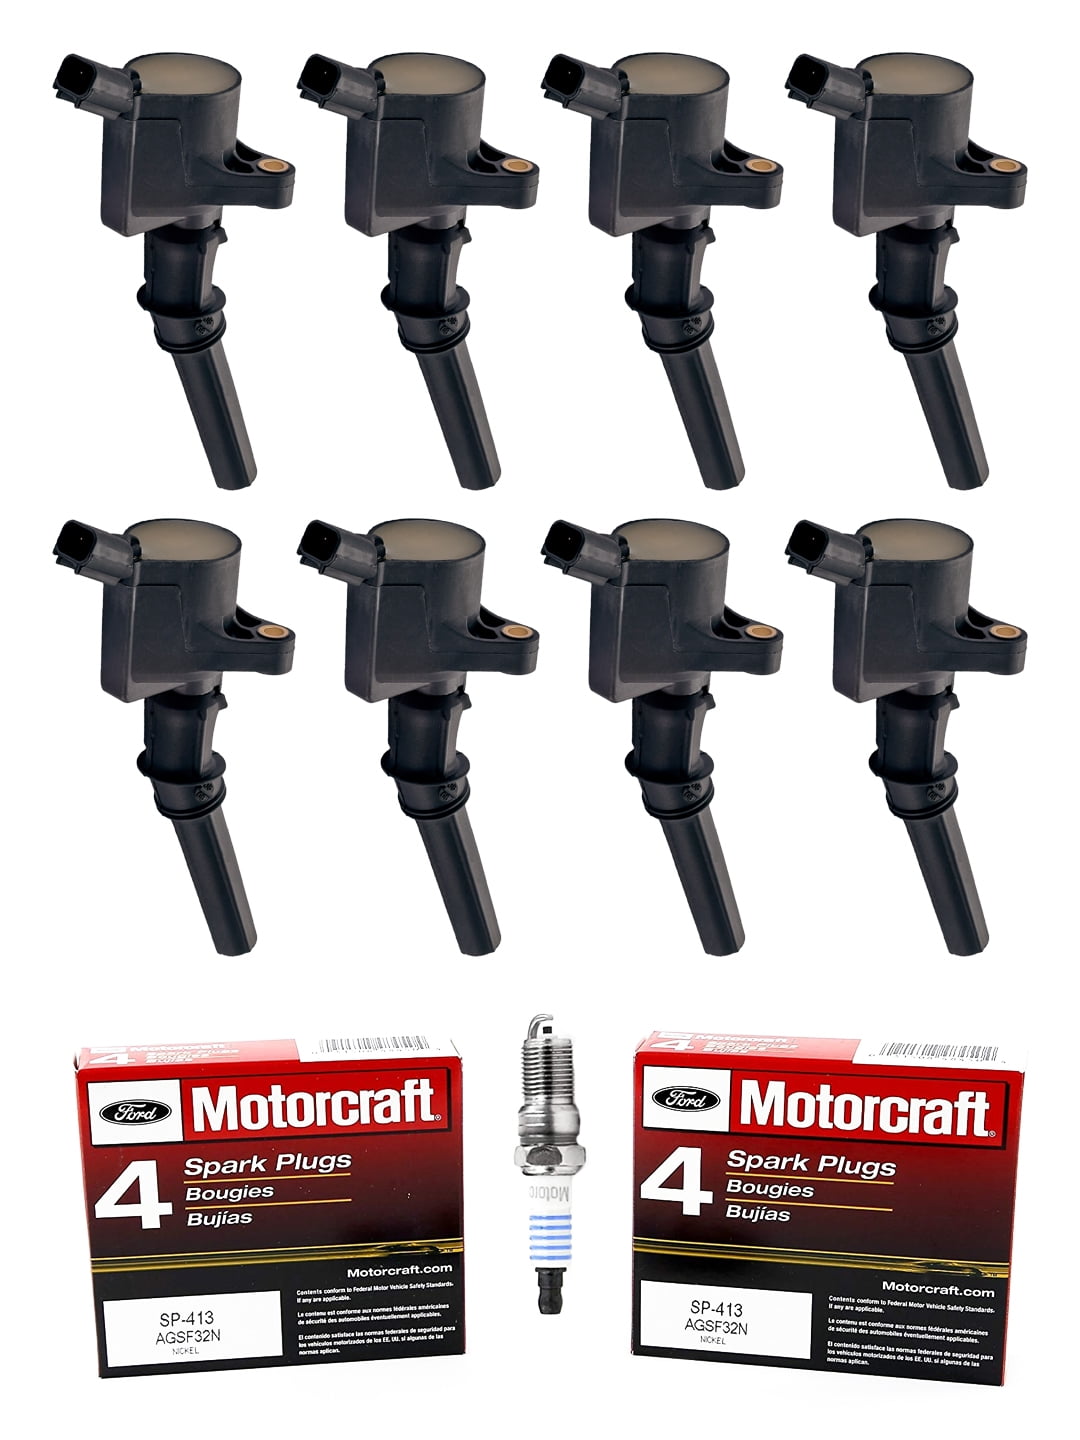 TRIL GEAR Pack of 8 Ignition Coils DG508 fit for Ford F-150 F-250 F-350 F-450 F-550 Excursion Lincoln Mercury V8 4.6L 5.4L & V10 6.8L FD503 